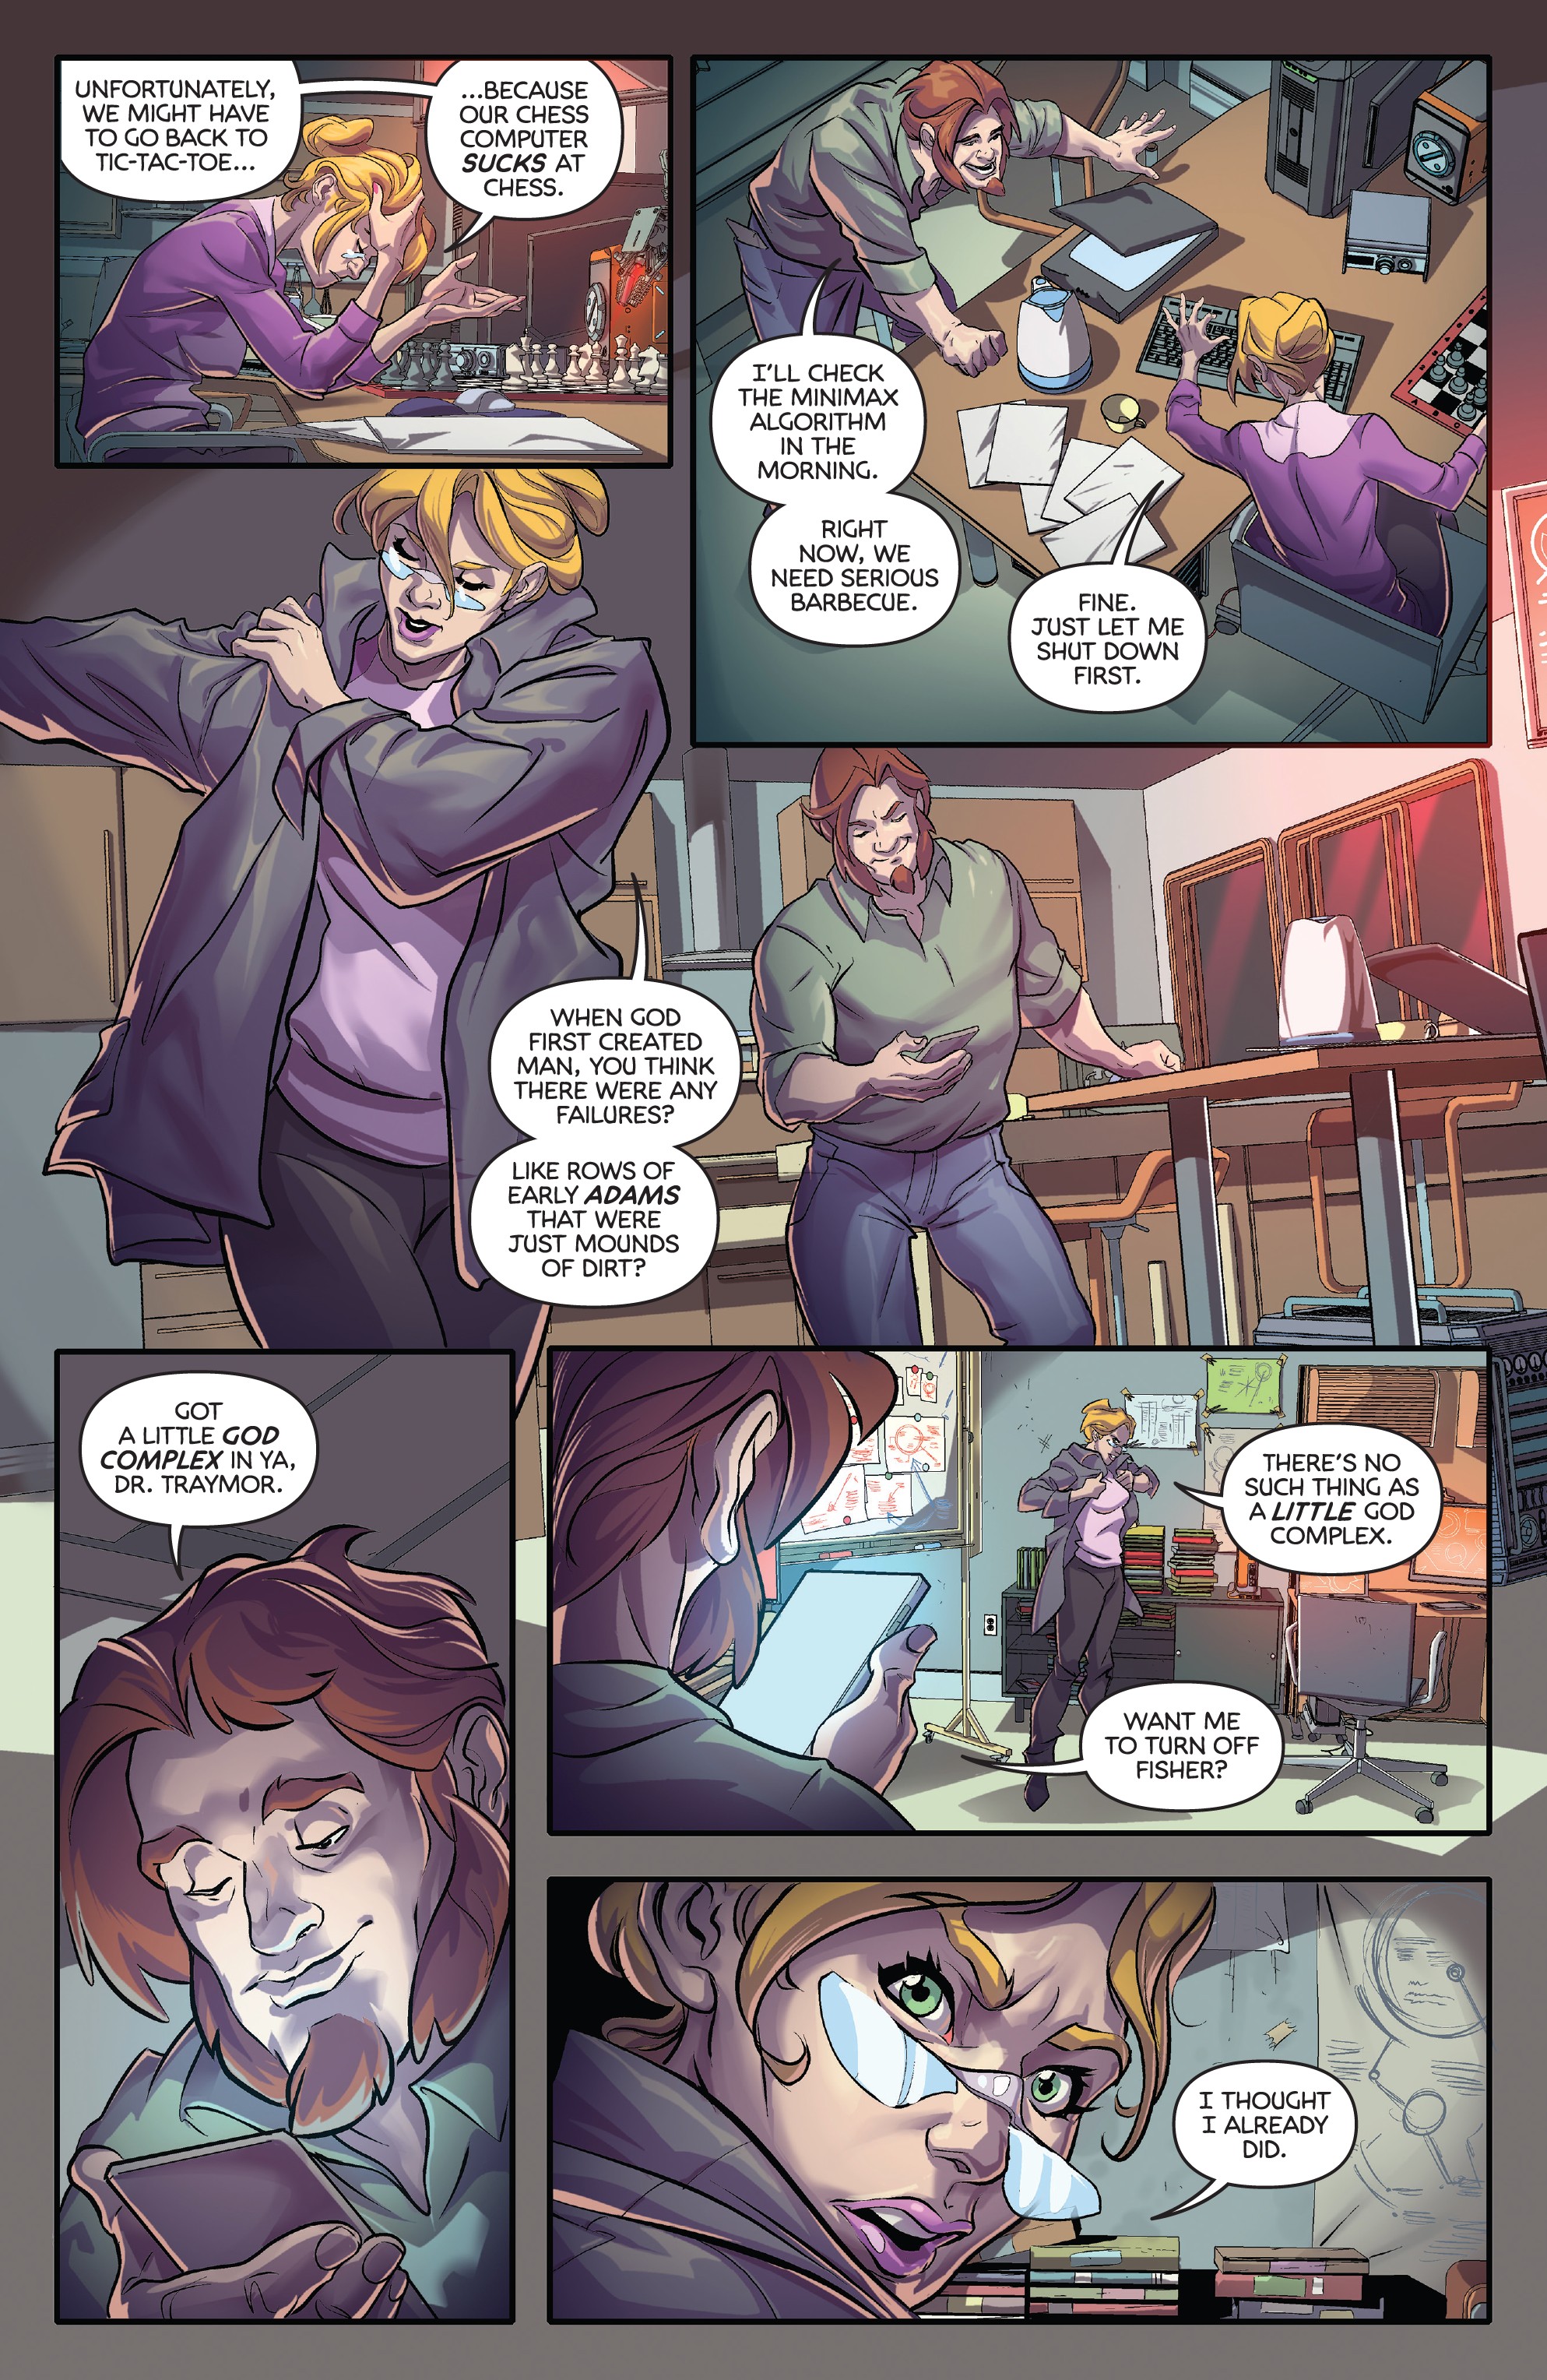 Volition (2018-): Chapter 3 - Page 4